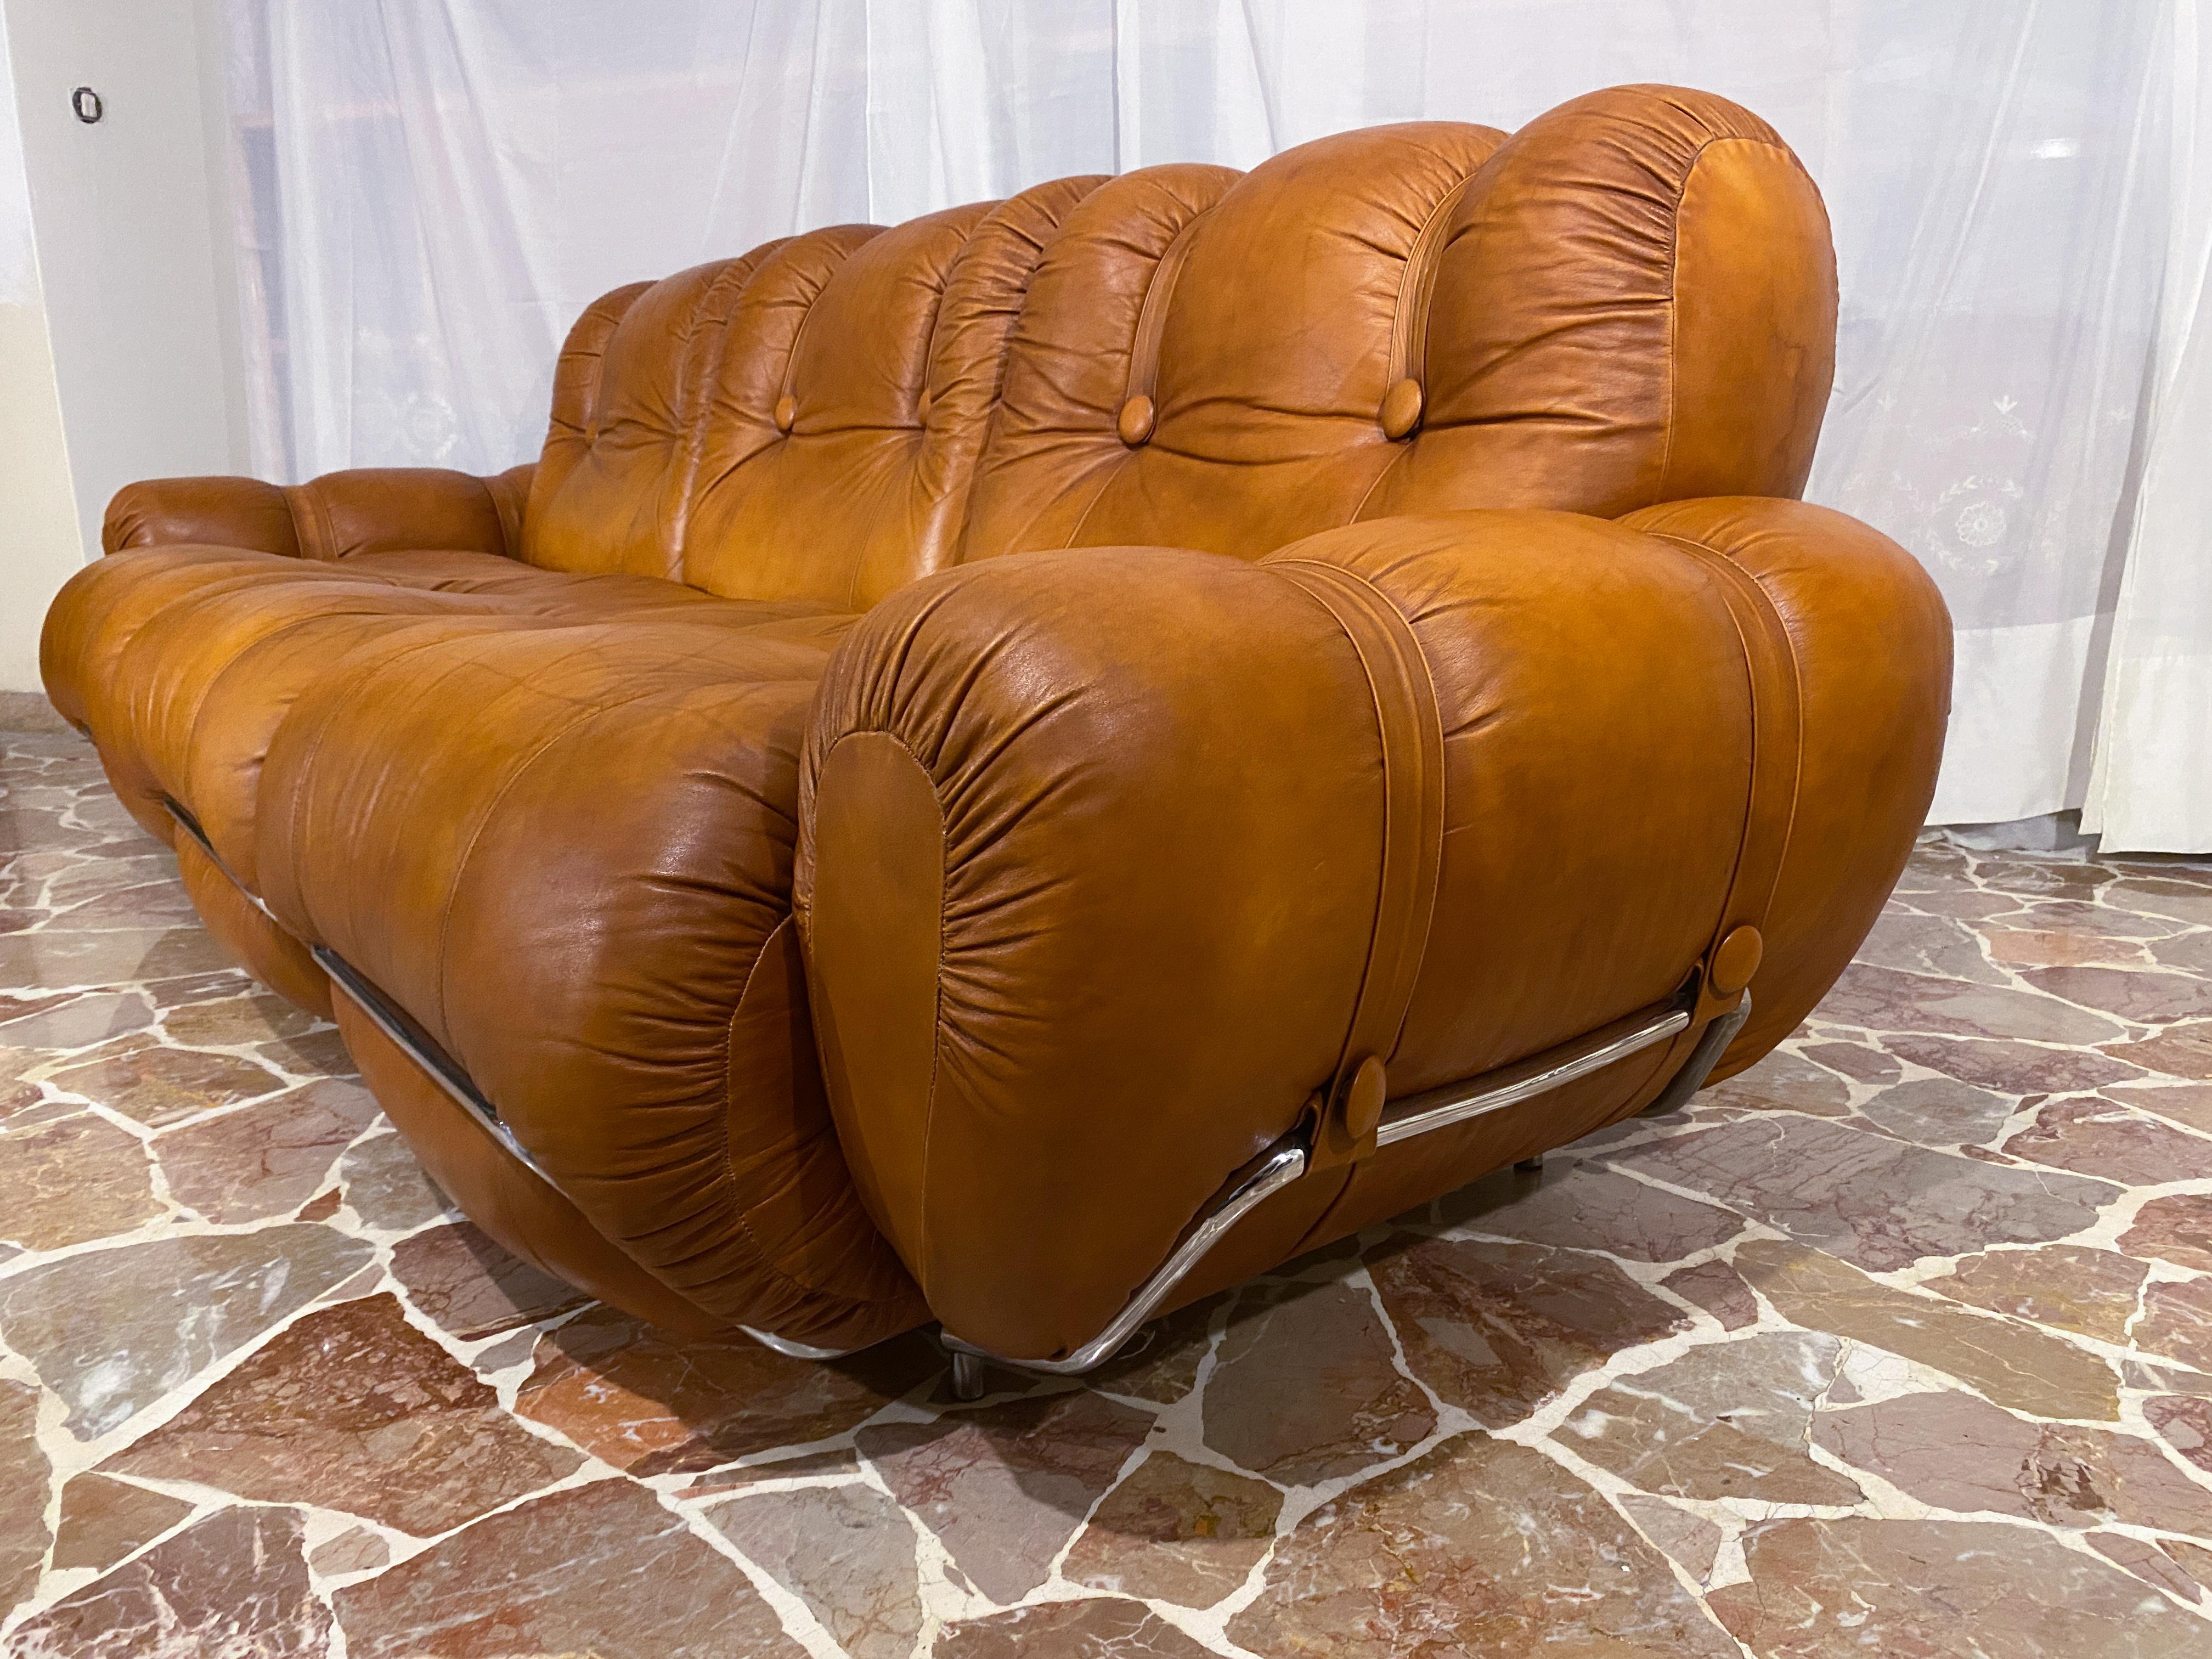 Italian Mid-Century Space Age Living Room Set in Natural Leather, 1970 For Sale 11